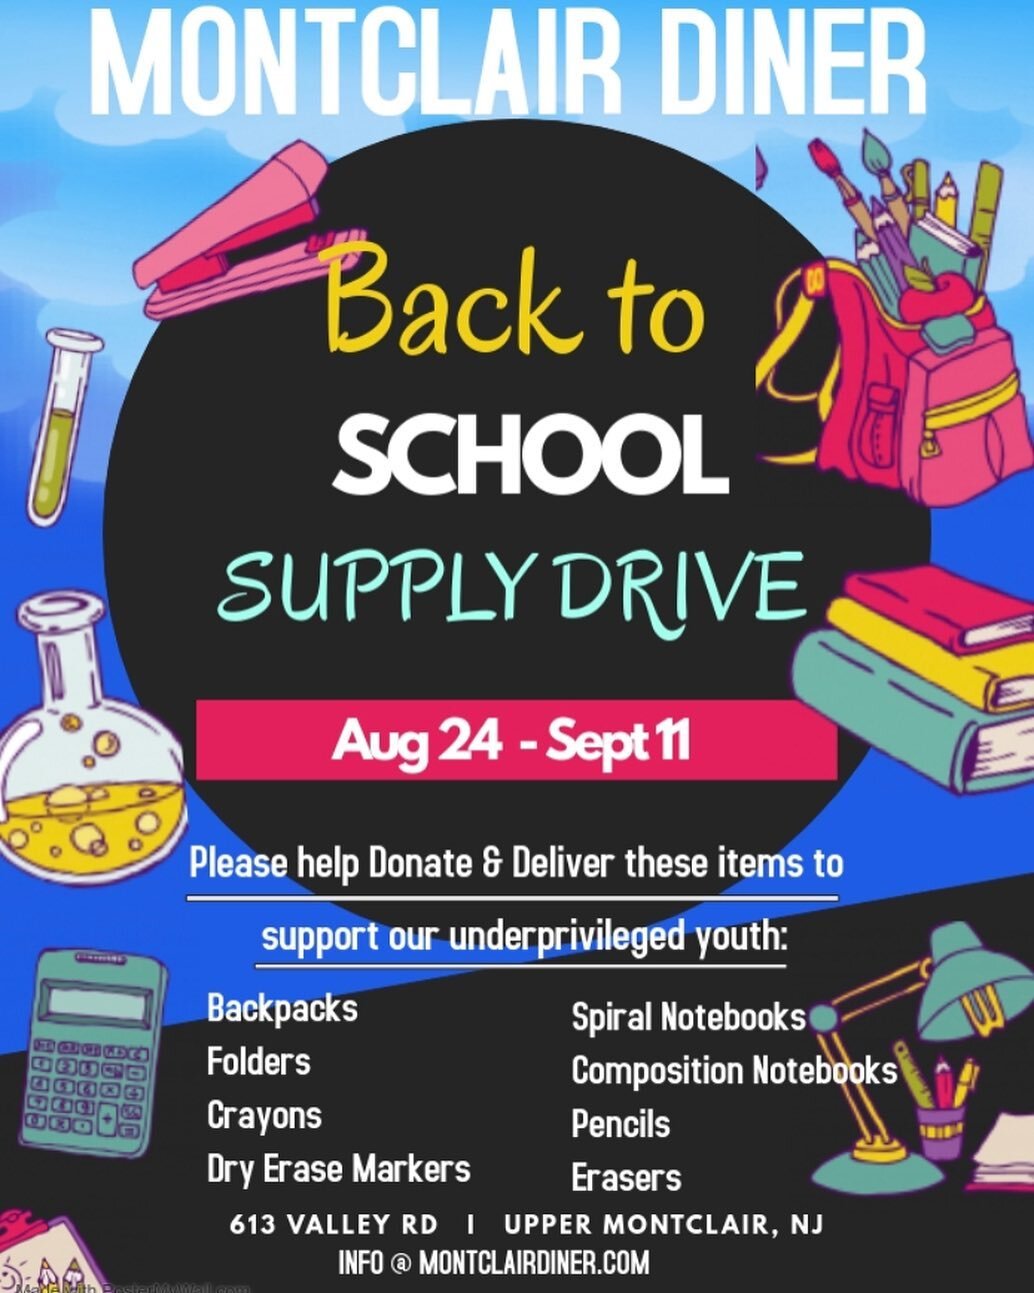 &ldquo;Life&rsquo;s most persistent and urgent question is, what are you doing to help others?&rdquo;
- Martin Luther King Jr -

Please help to support our &ldquo;2nd Annual&rdquo; back to school drive by donating school supplies that will help our c